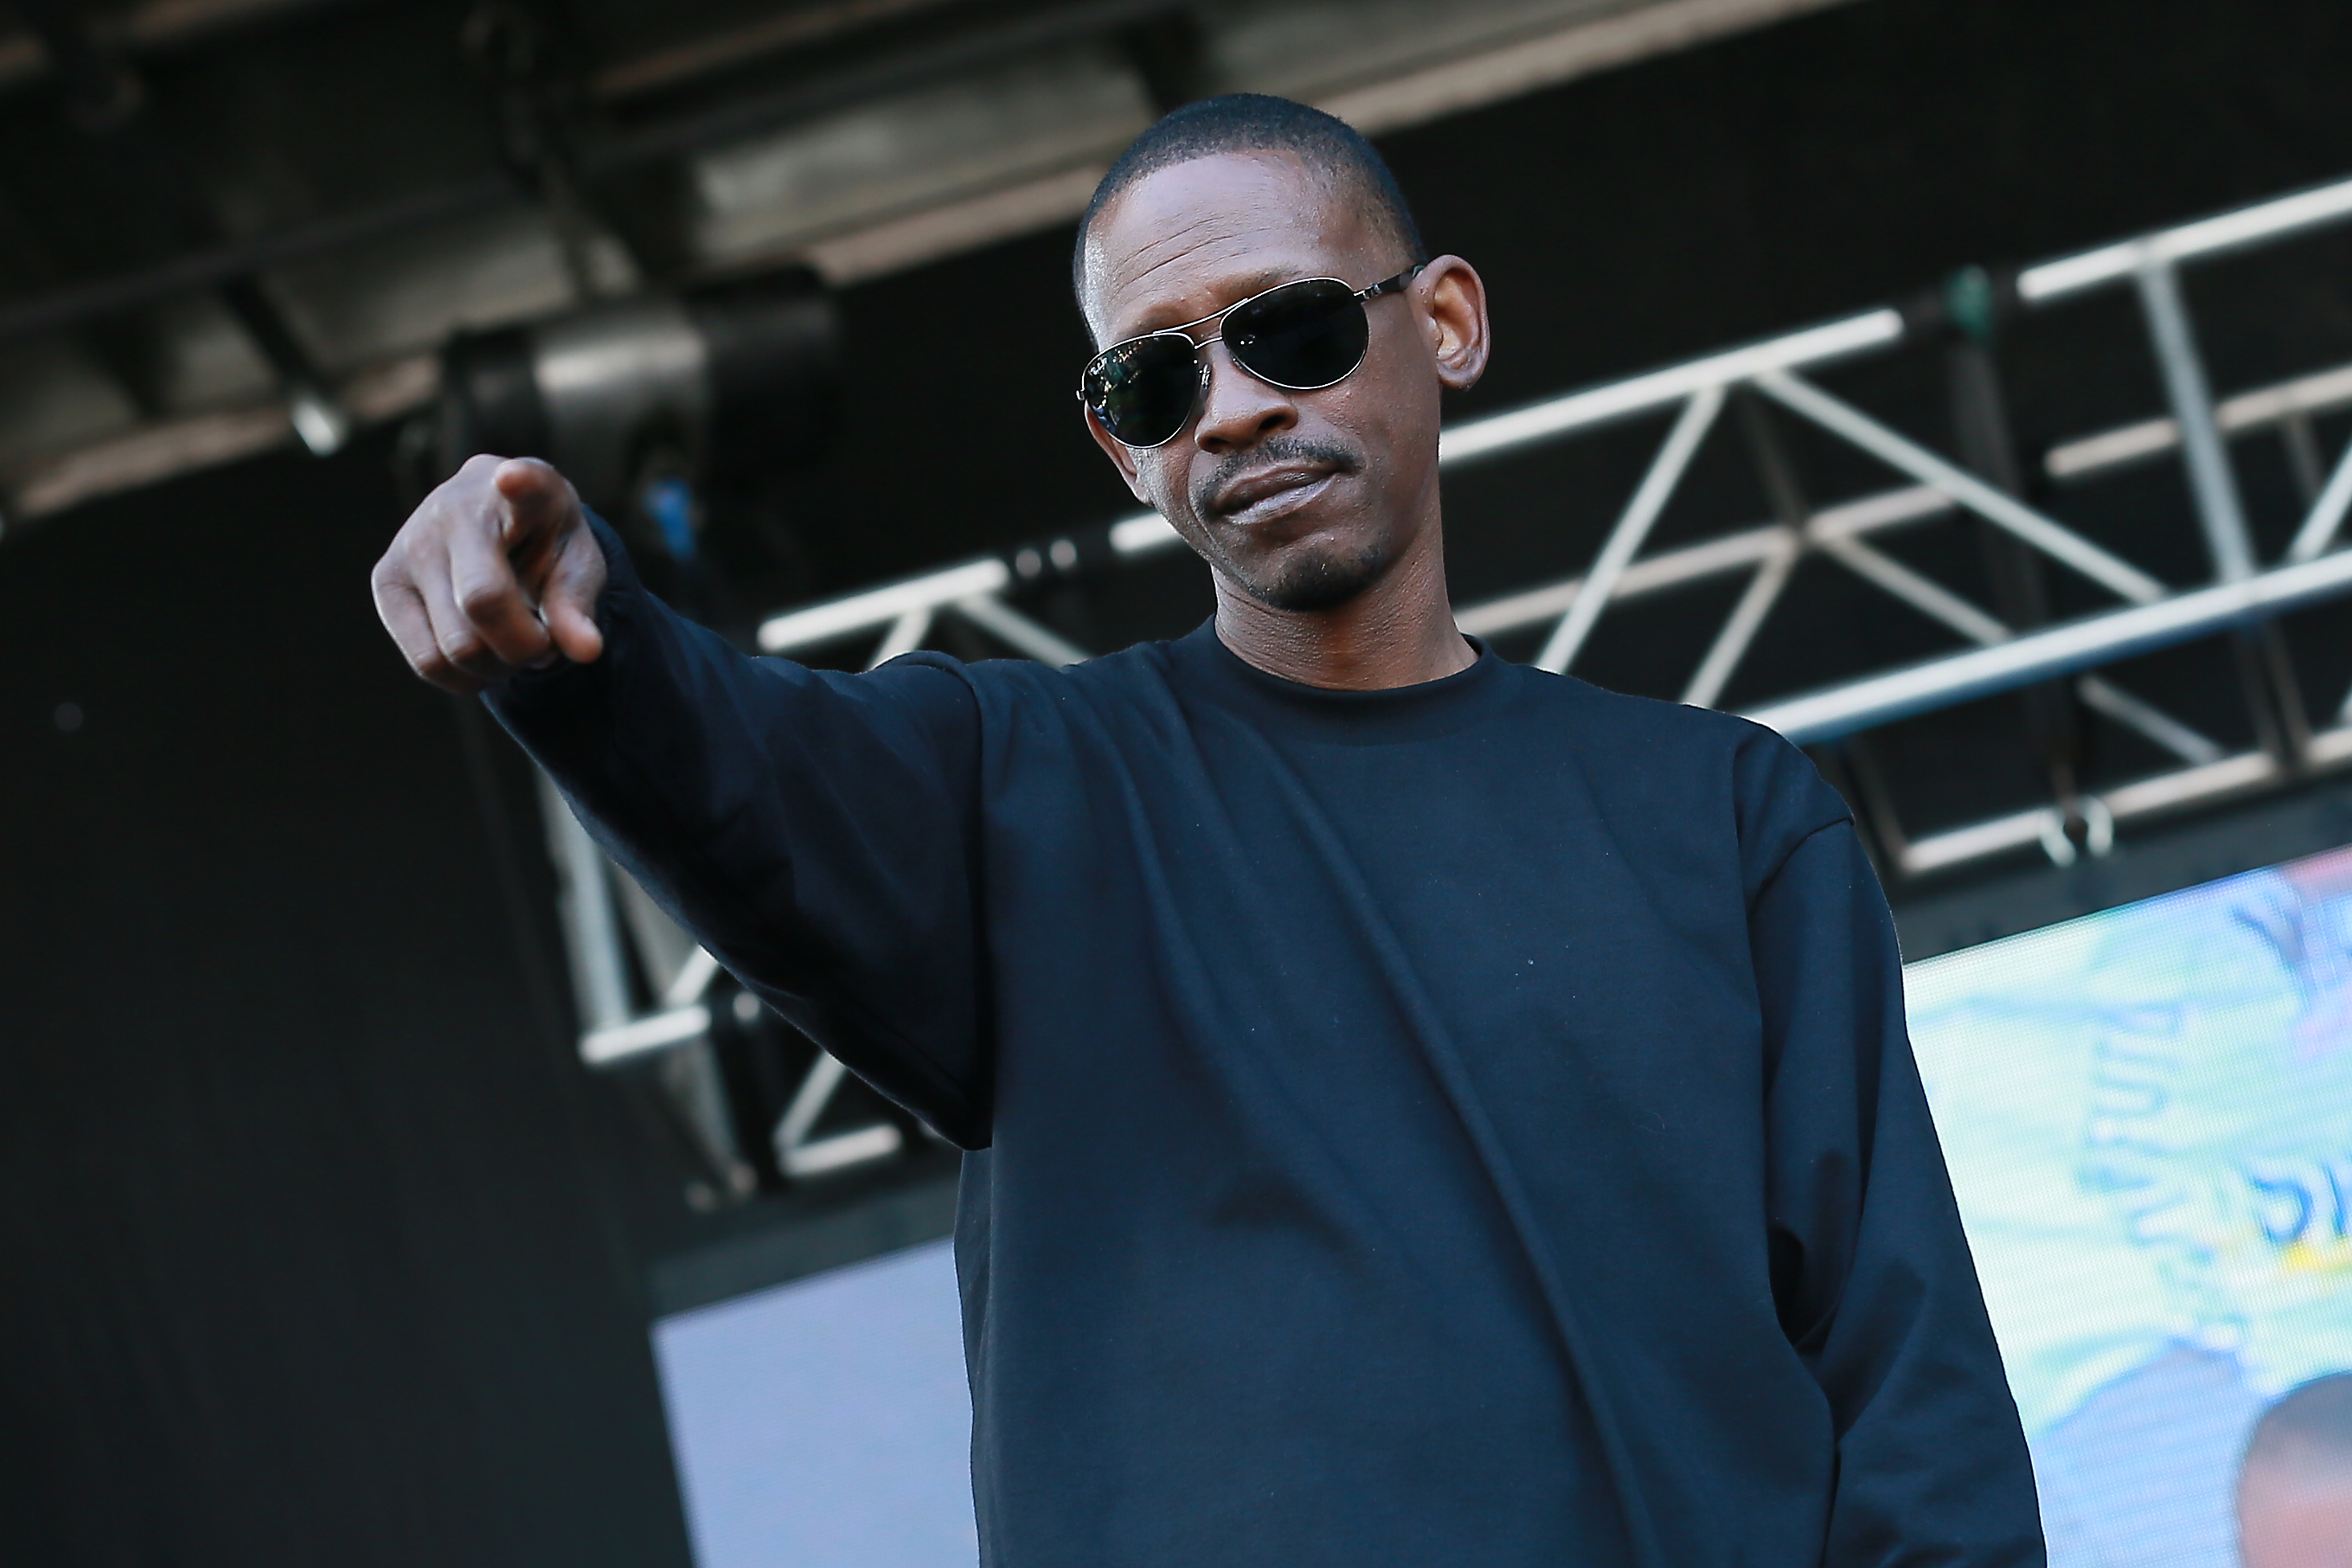 Kurupt Was Rushed To The Hospital After Relapsing On Alcohol: Report